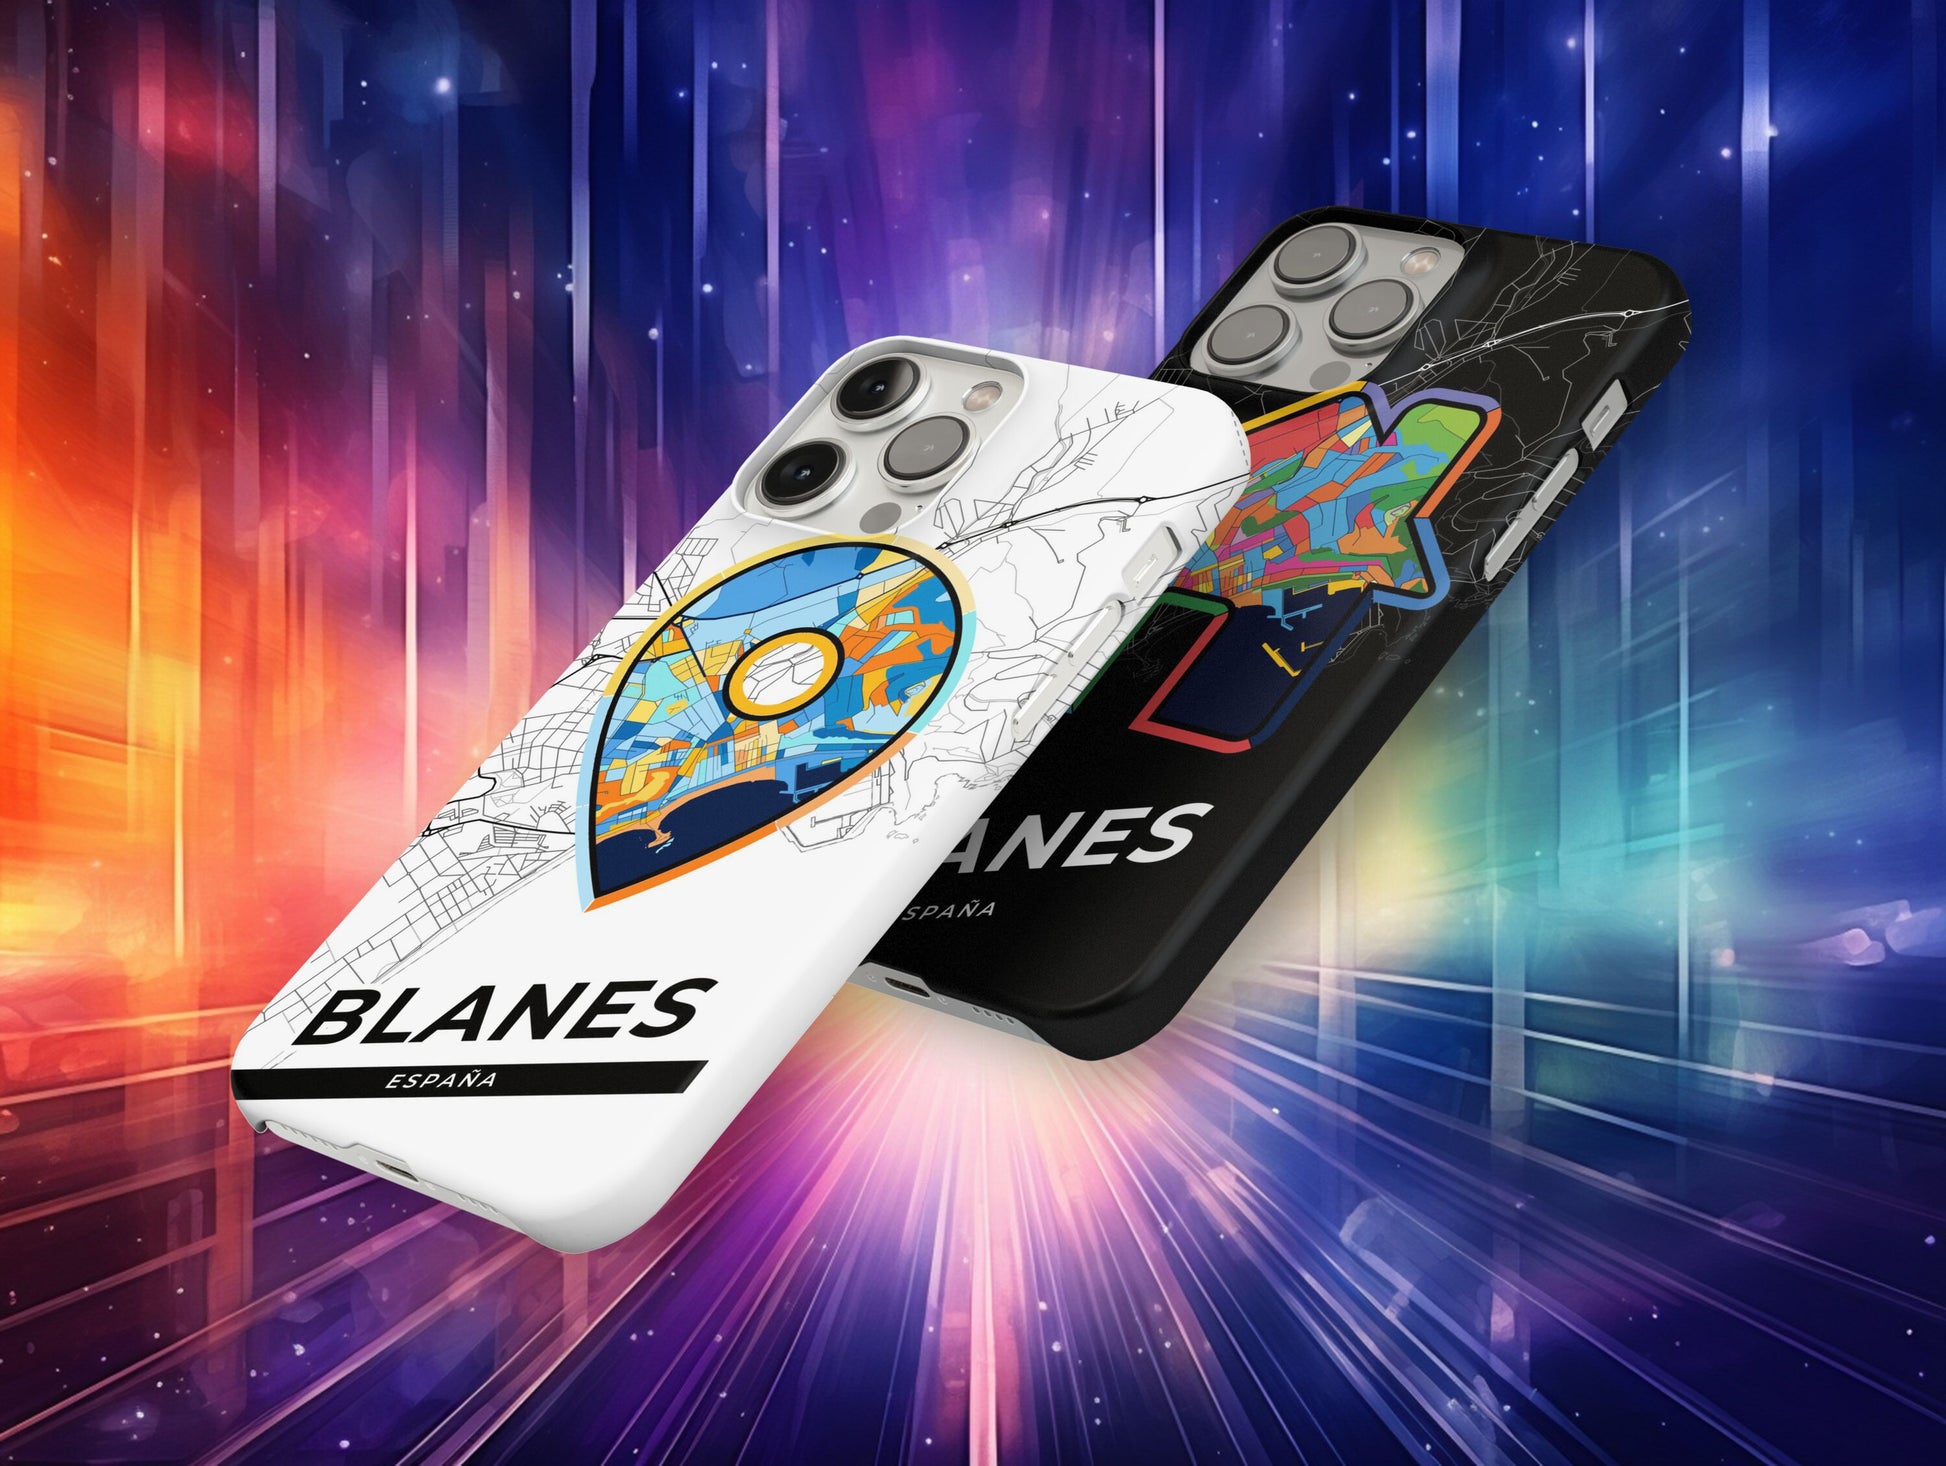 Blanes Spain slim phone case with colorful icon. Birthday, wedding or housewarming gift. Couple match cases.